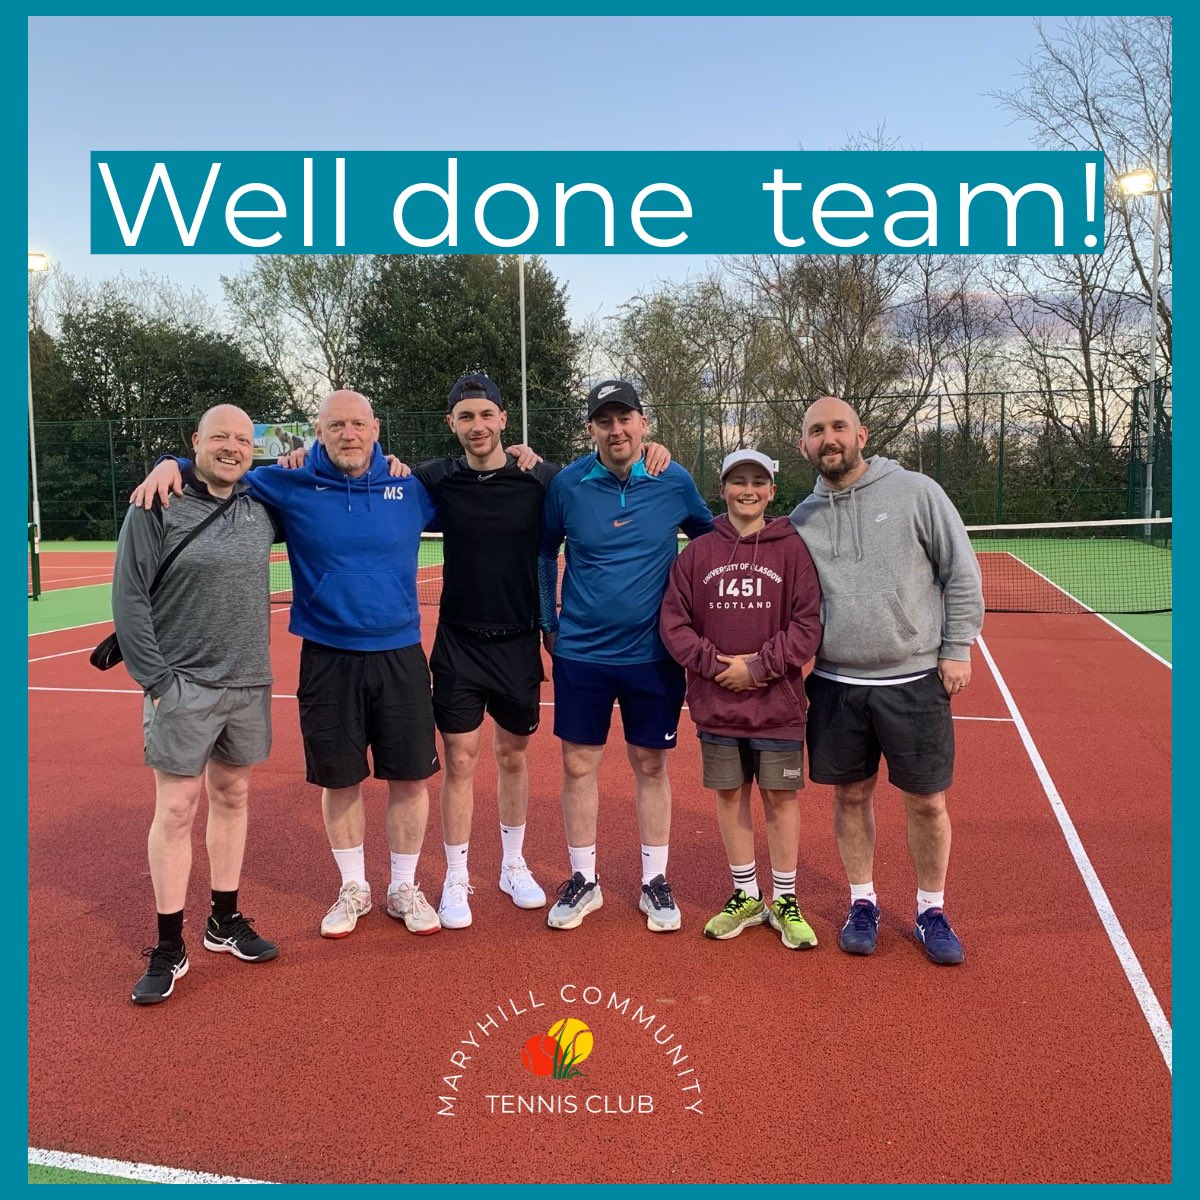 Well done to our M1 team on their 9-0 win over East Kilbride M2!

#teammctc 
#growingthegame 
#maryhilltennis